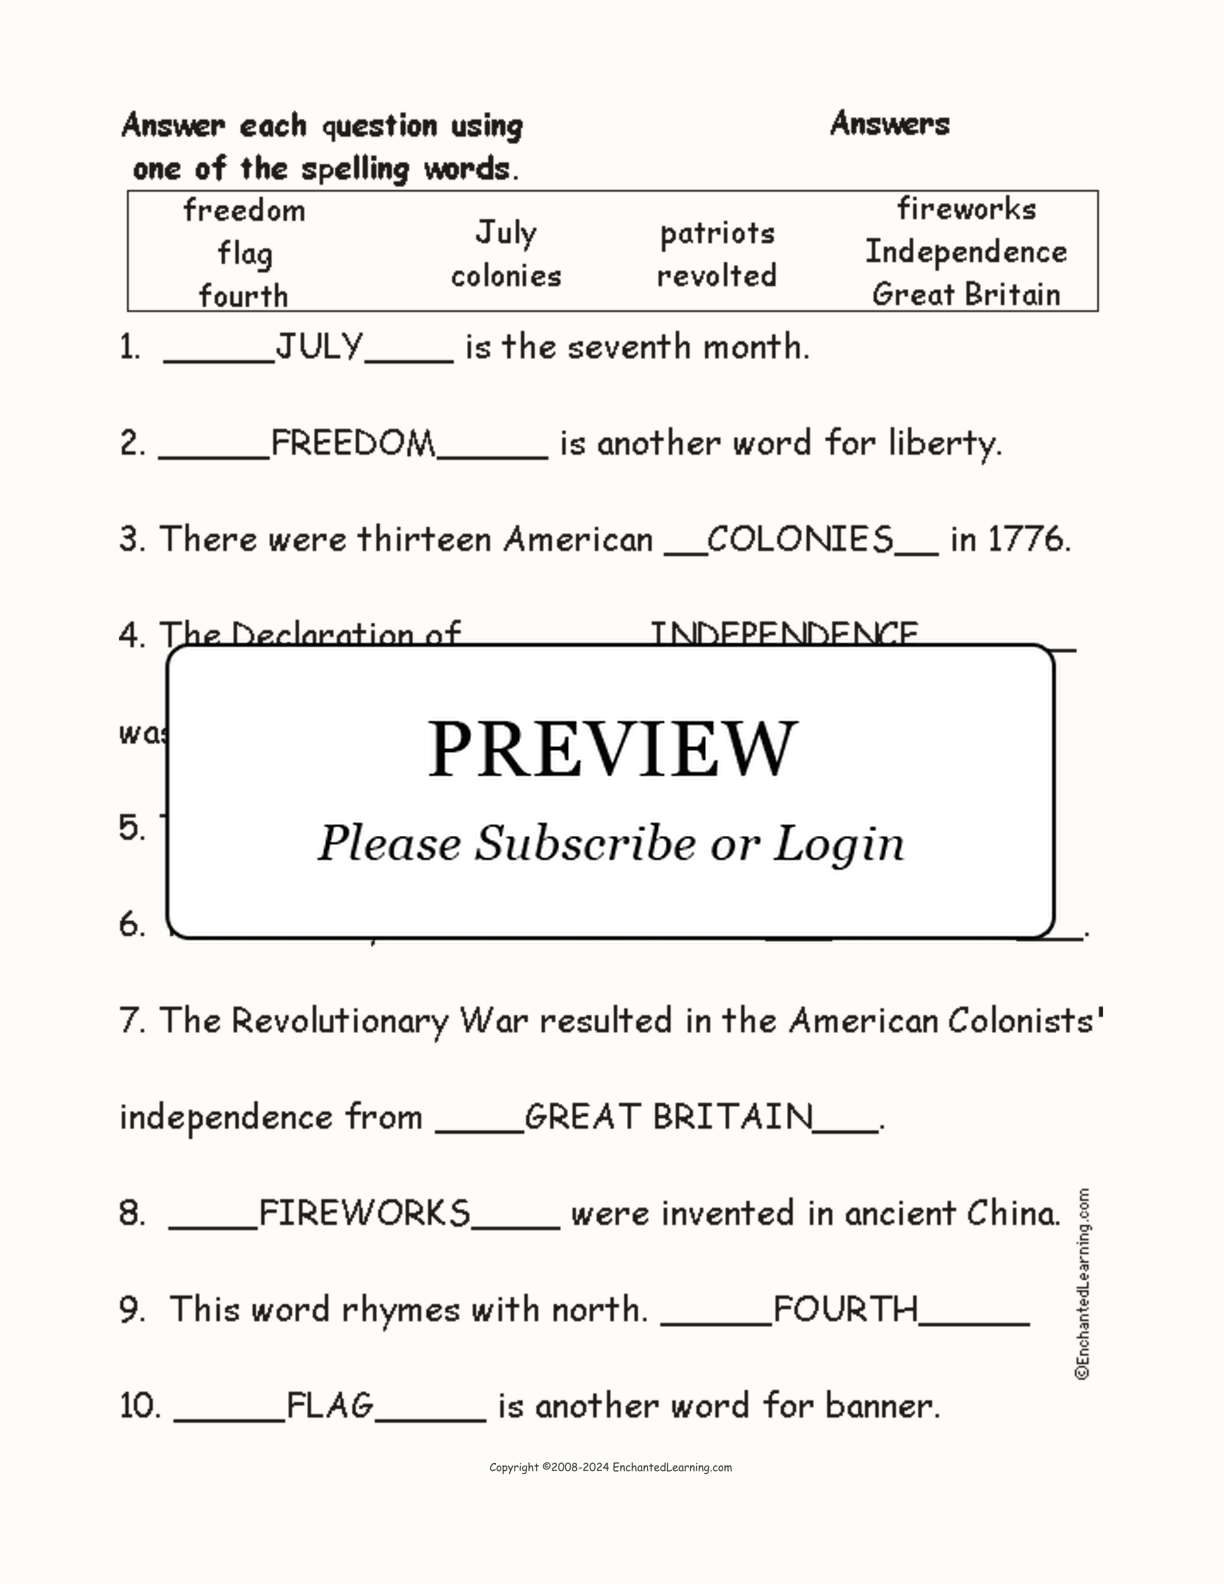 July 4th: Spelling Word Questions interactive worksheet page 2